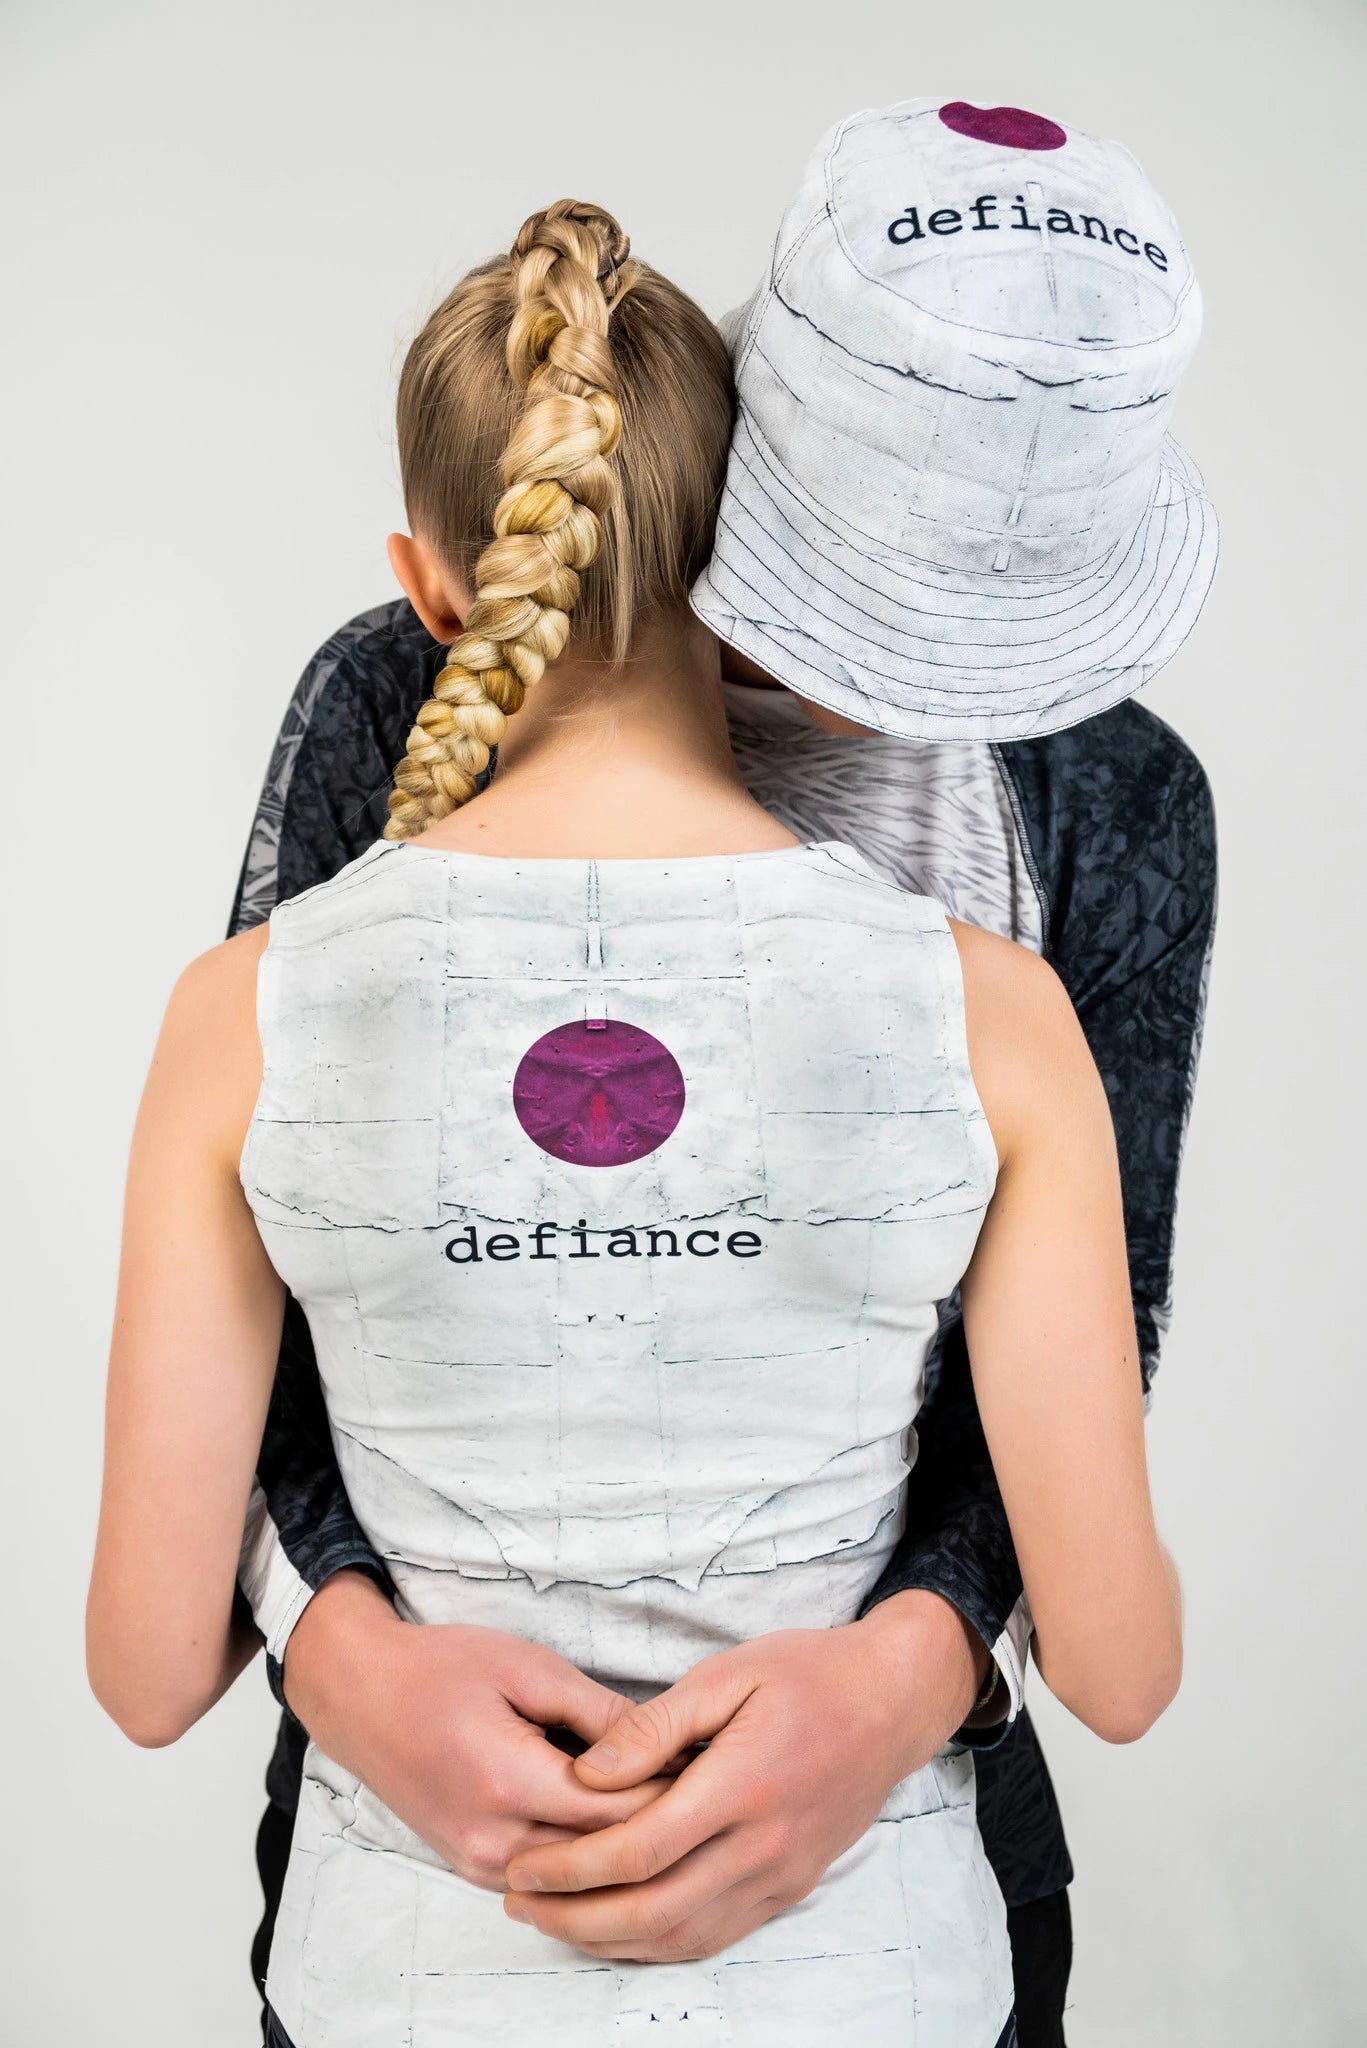 Models hugging, featuring a tank top and bucket hat with the Defiance logo.